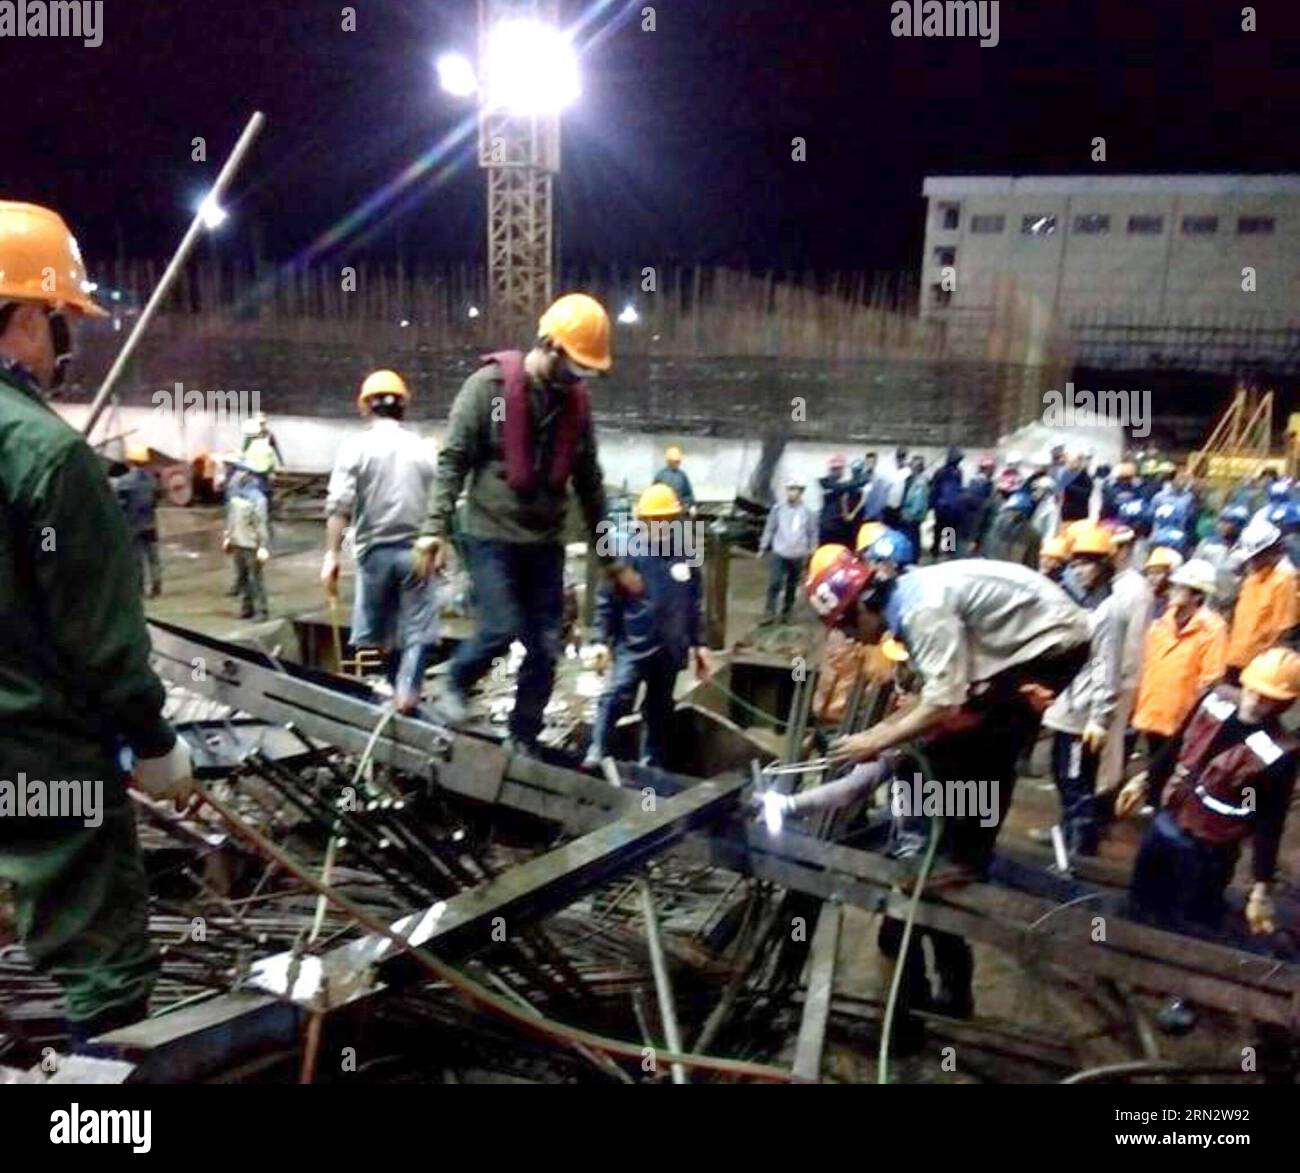 HA TINH, March 25, 2015 -- Rescuers work at the accident site in Ha Tinh Province, central Vietnam, March 25, 2015. Dozens of people were killed and injured in an incident at the construction site of Formosa Ha Tinh Steel Corporation in Ha Tinh Province. ) VIETNAM-HA TINH-ACCIDENT VNA PUBLICATIONxNOTxINxCHN   Ha Tinh March 25 2015 Rescue Work AT The accident Site in Ha Tinh Province Central Vietnam March 25 2015 Dozens of Celebrities Were KILLED and Injured in to INCIDENT AT The Construction Site of Formosa Ha Tinh Steel Corporation in Ha Tinh Province Vietnam Ha Tinh accident VNA PUBLICATIONx Stock Photo